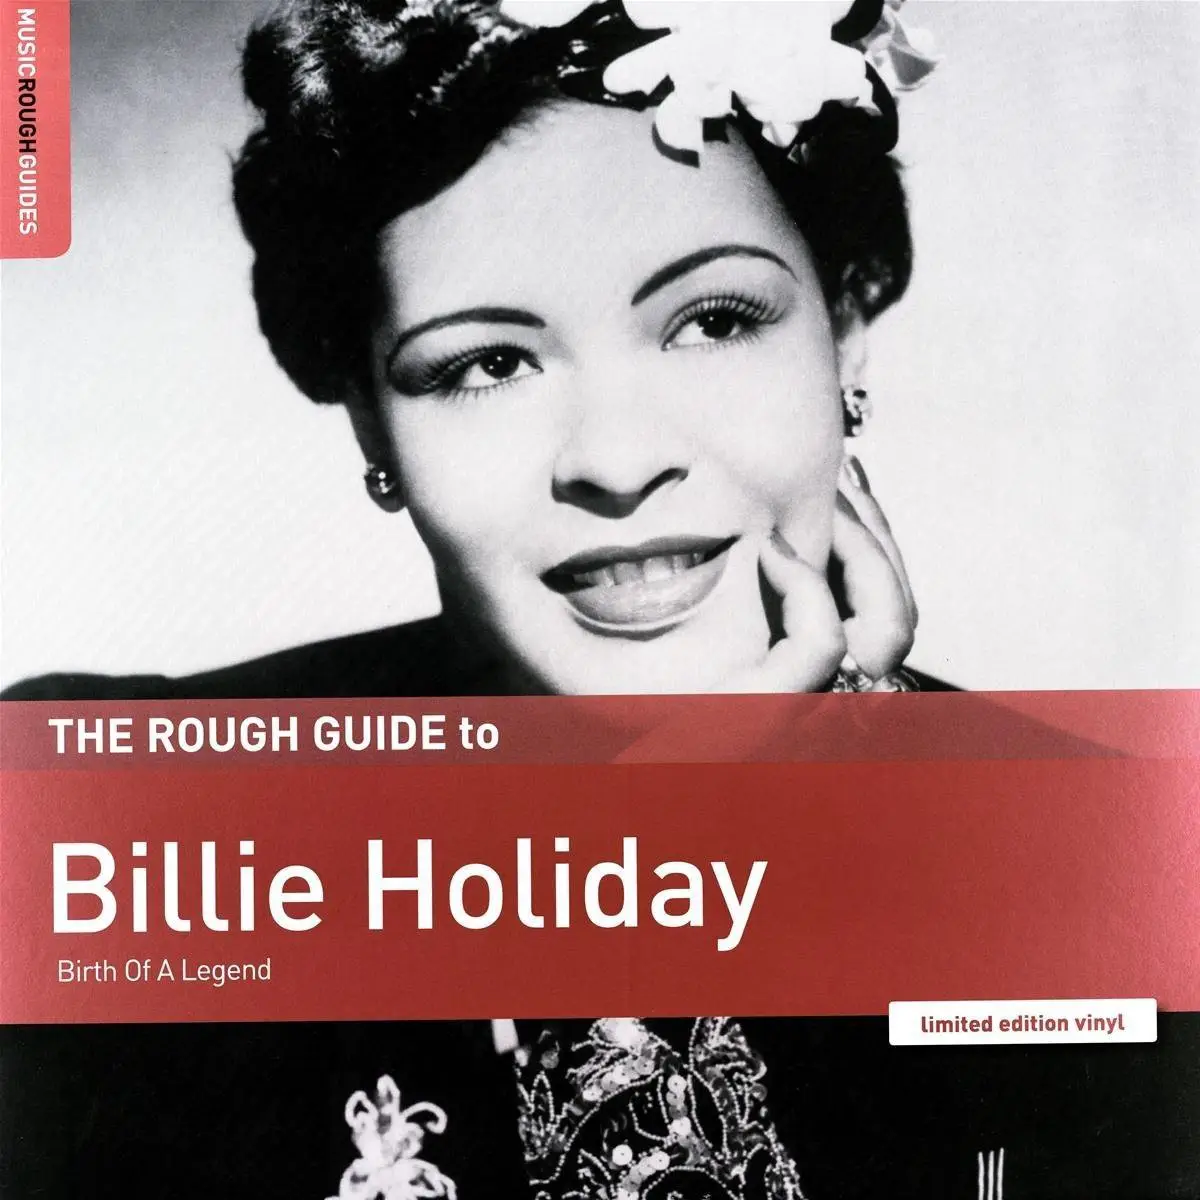 Billie Holiday The Rough Guide To Billie Holiday Birth Of A Legend 2019 Avaxhome 8539